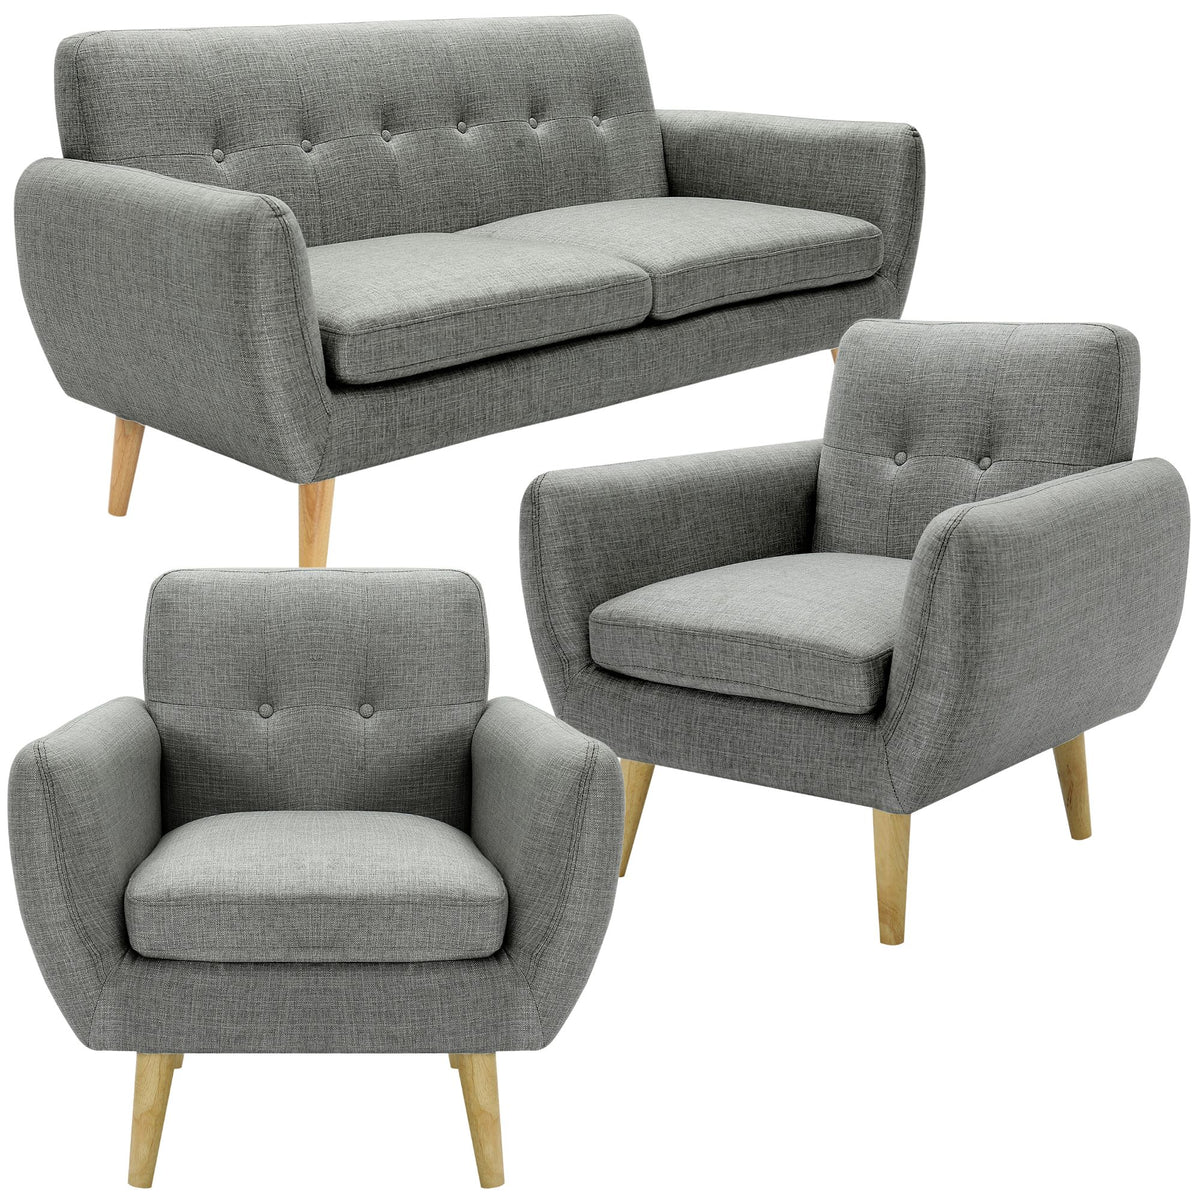 Dane 3 + 1 + 1 Seater Fabric Upholstered Sofa Armchair Lounge Couch - Mid Grey.